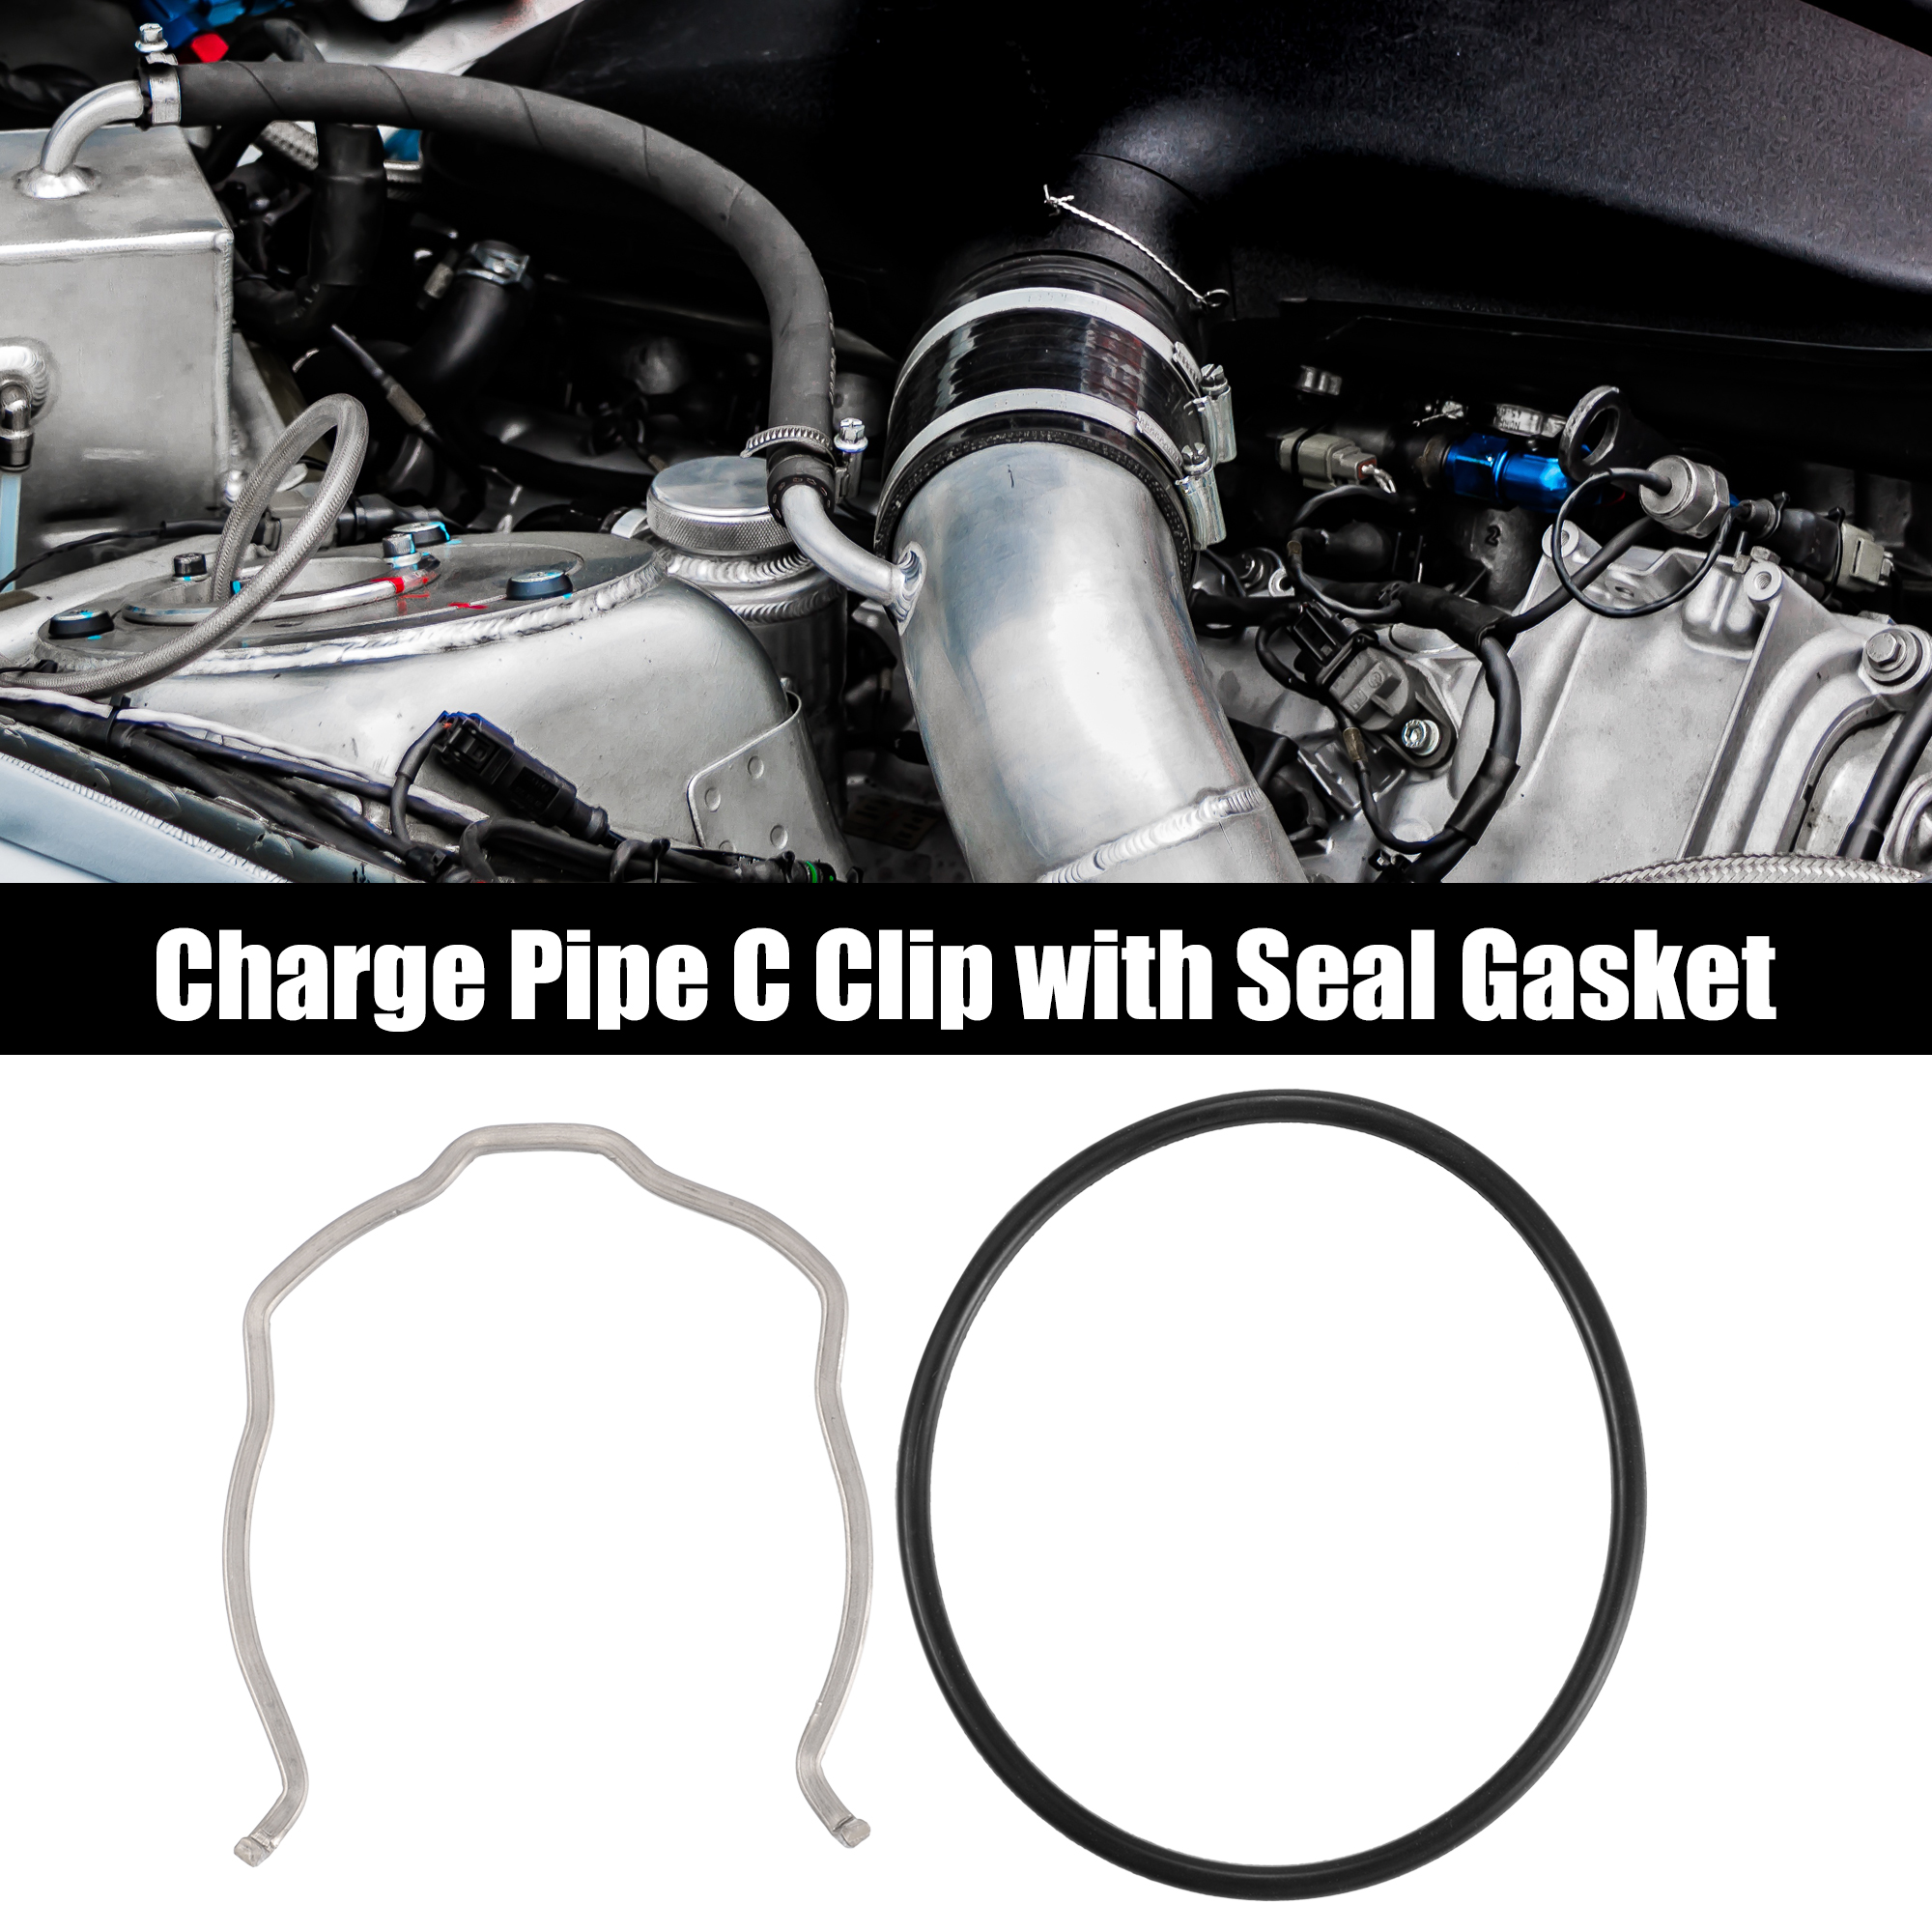 Unique Bargains 1 Set Car Charge Pipe C Clip with O Ring Seal Gasket for BMW N54 N55 335i